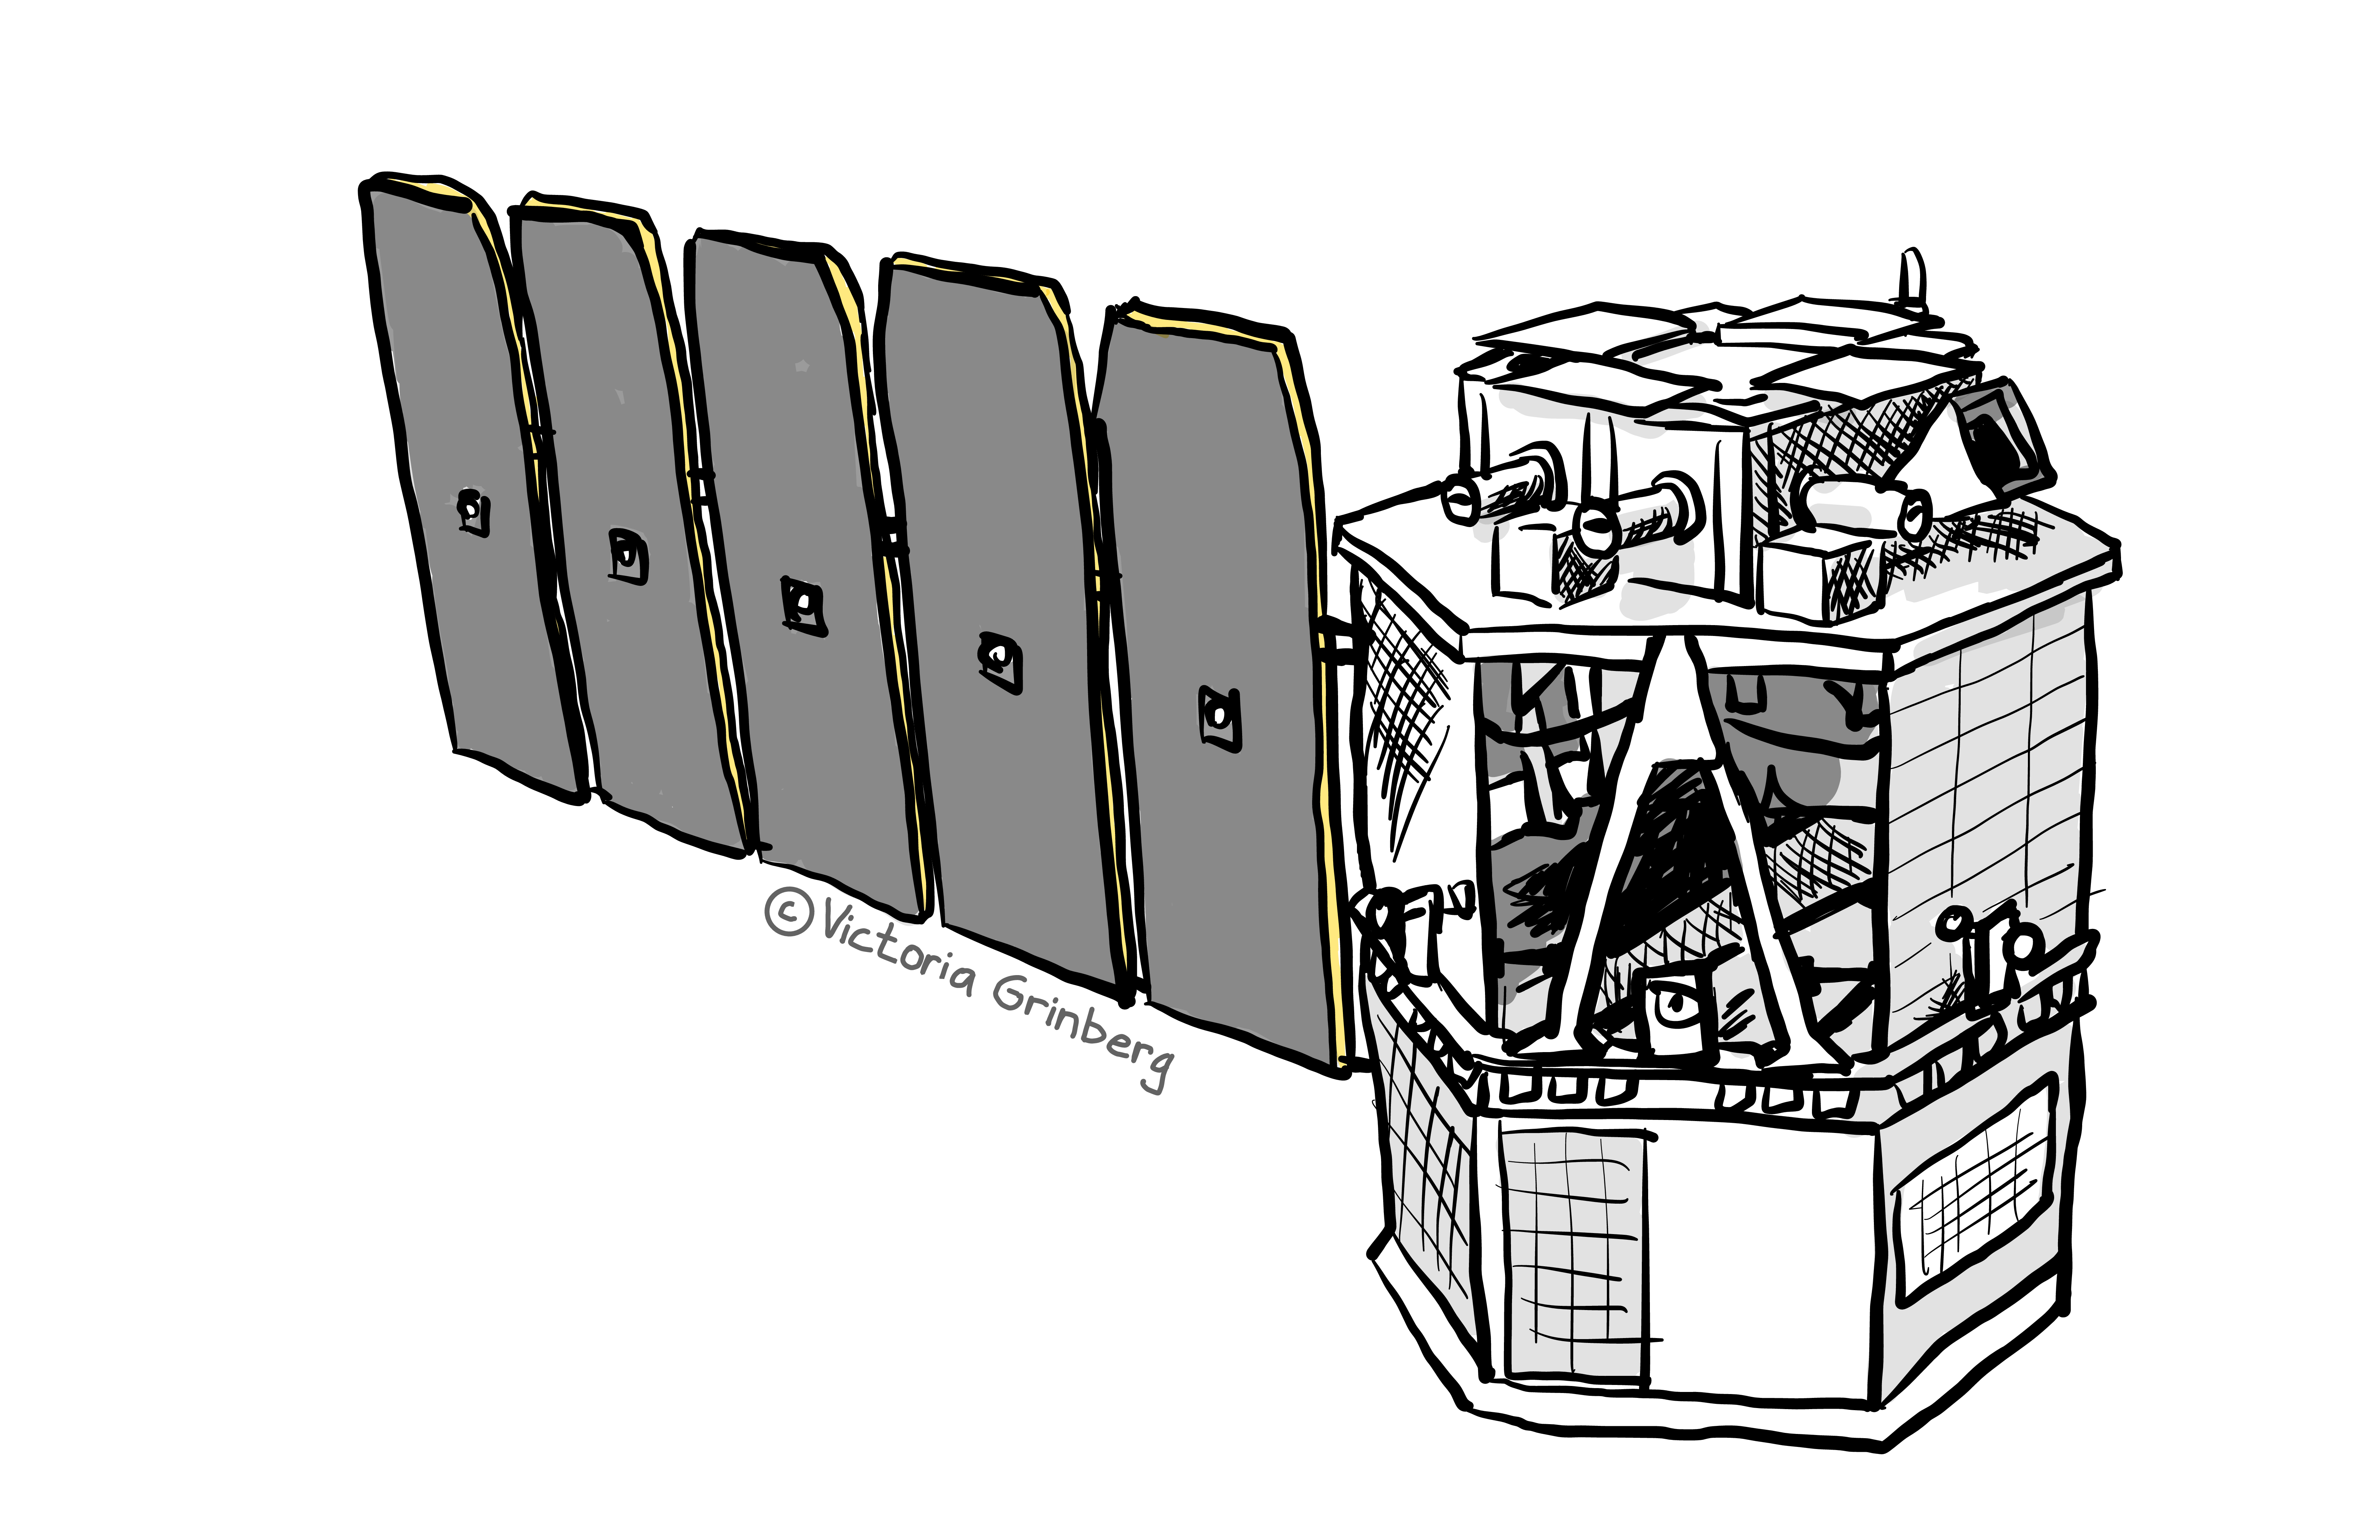 A black & white drawing digital drawing of the COSI spacecraft - satellite with solar panel on the side. Some gold/yellow on the panels.